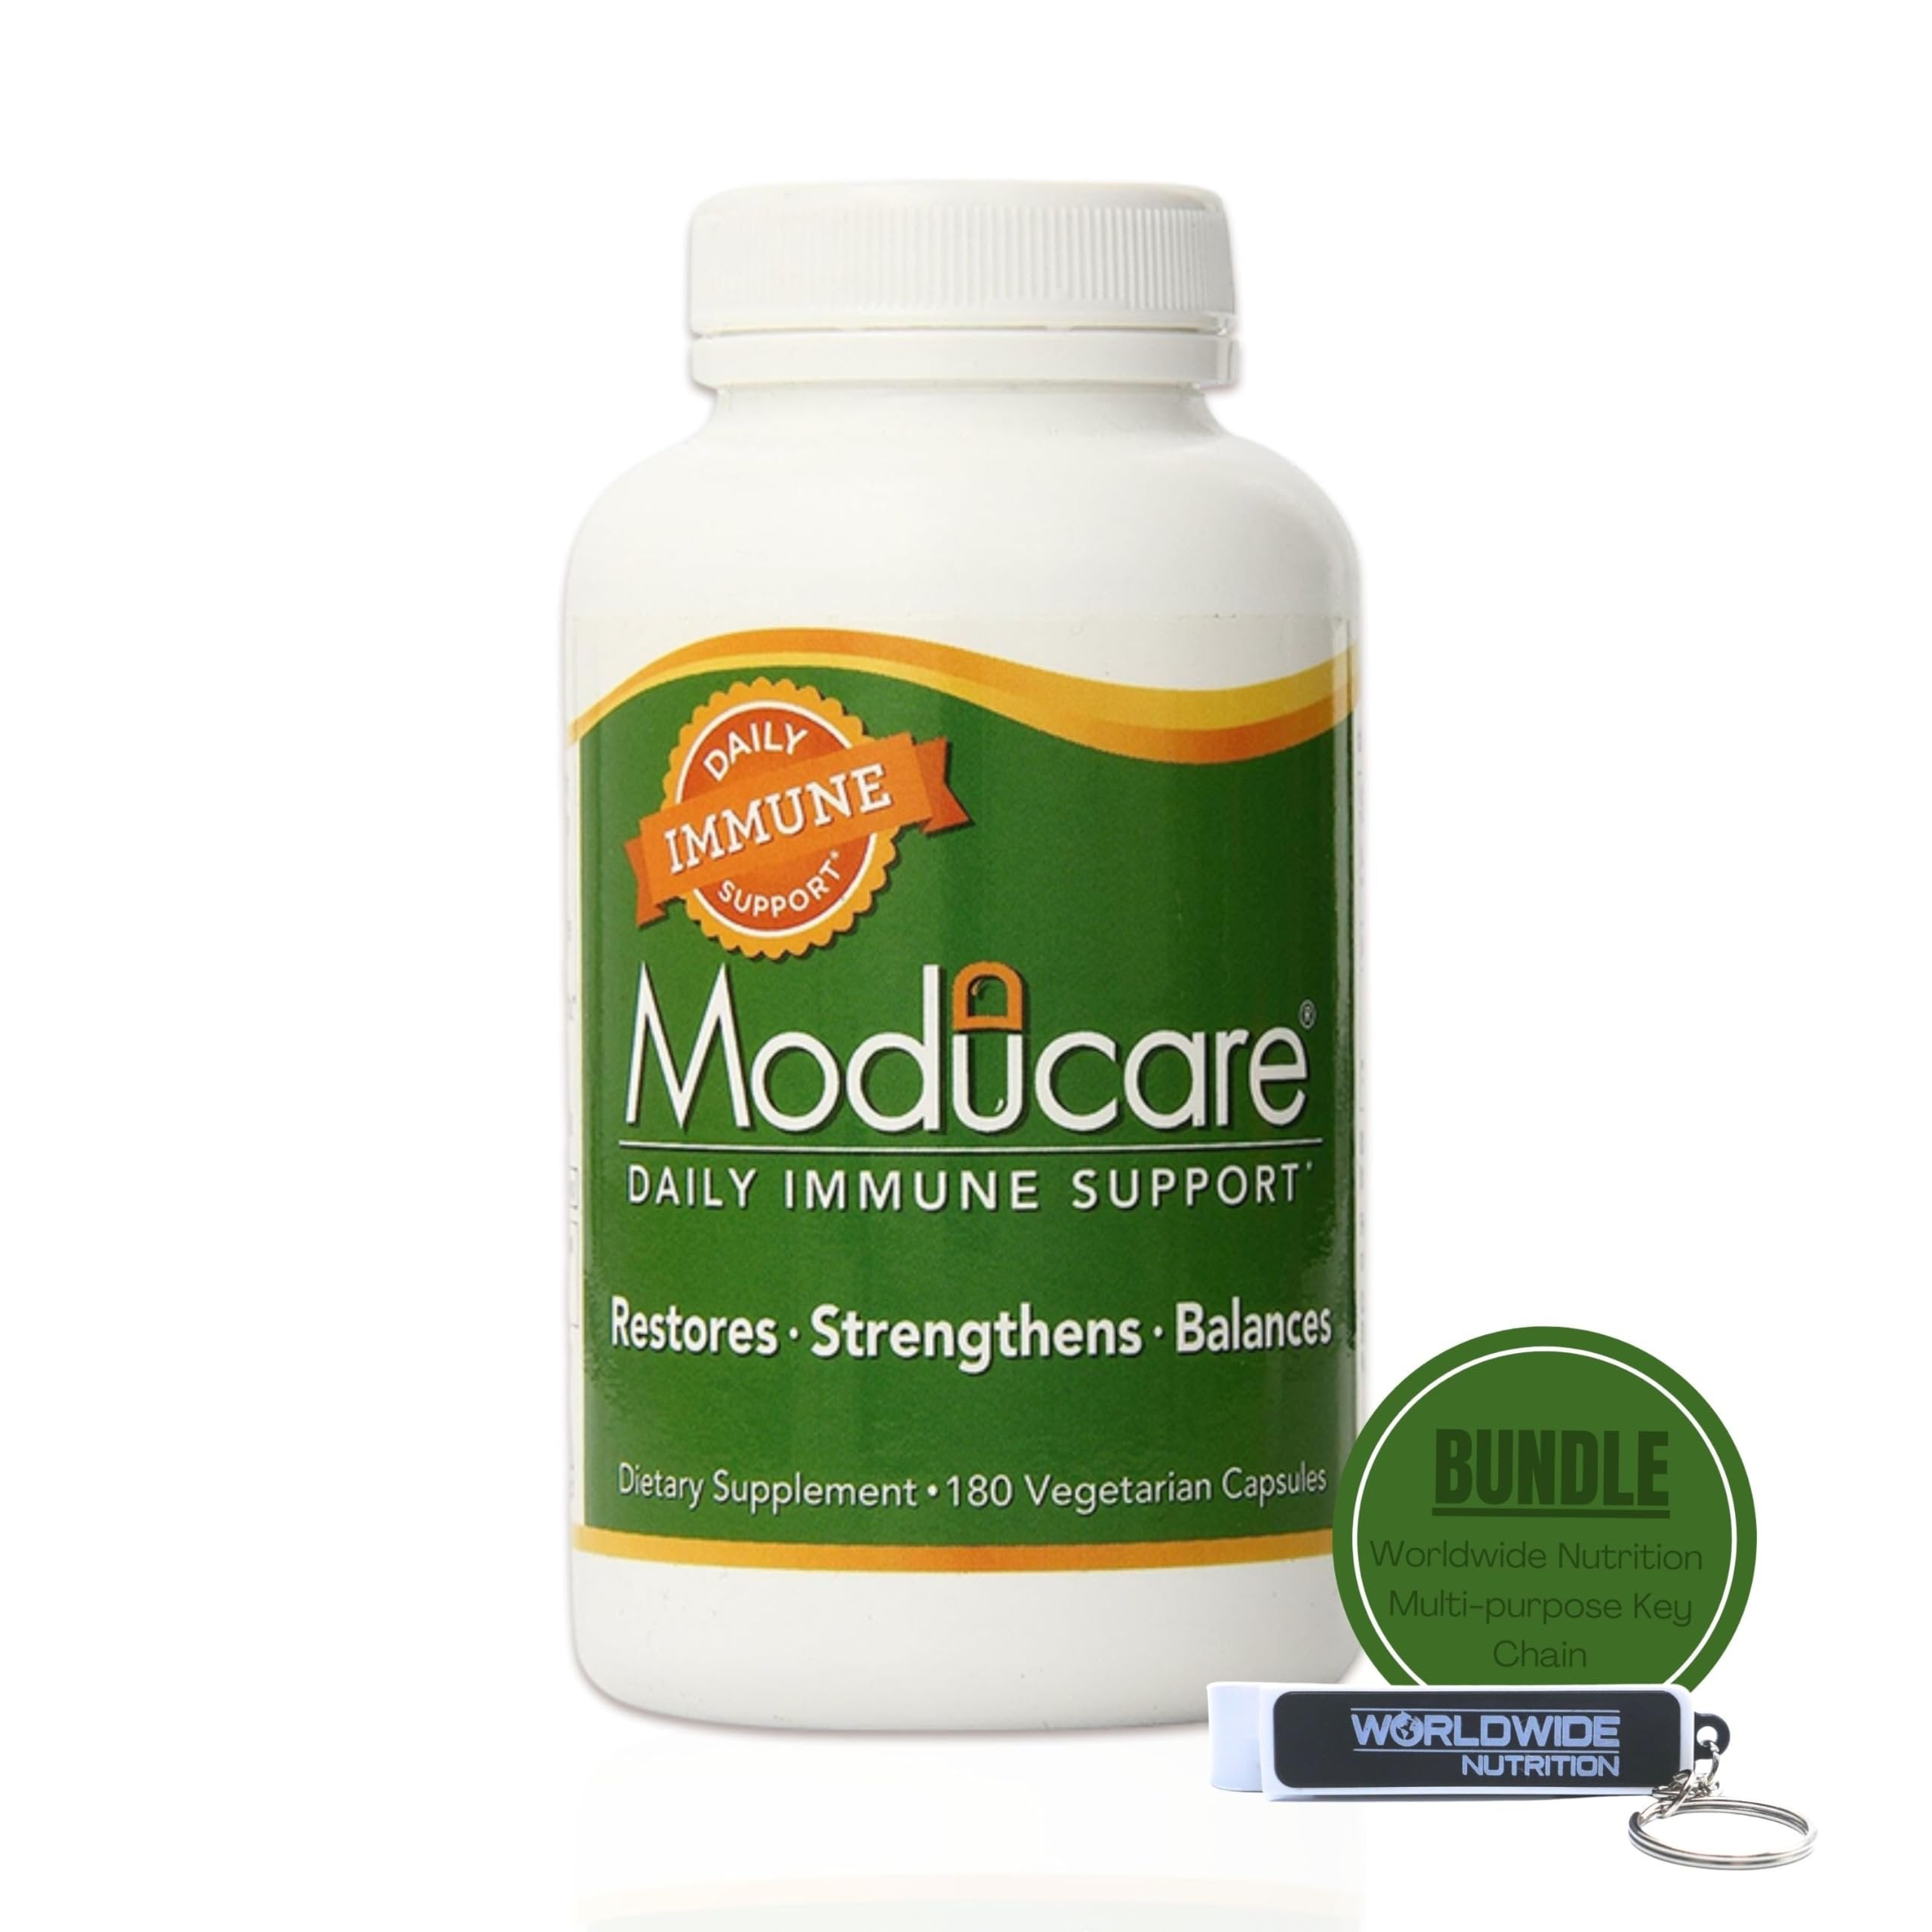 Worldwide Nutrition Bundle, 2 Items: Moducare Daily Immune Support, Plant Sterol Dietary Supplement, 180 Vegetarian Capsules and Multi-Purpose Key Chain